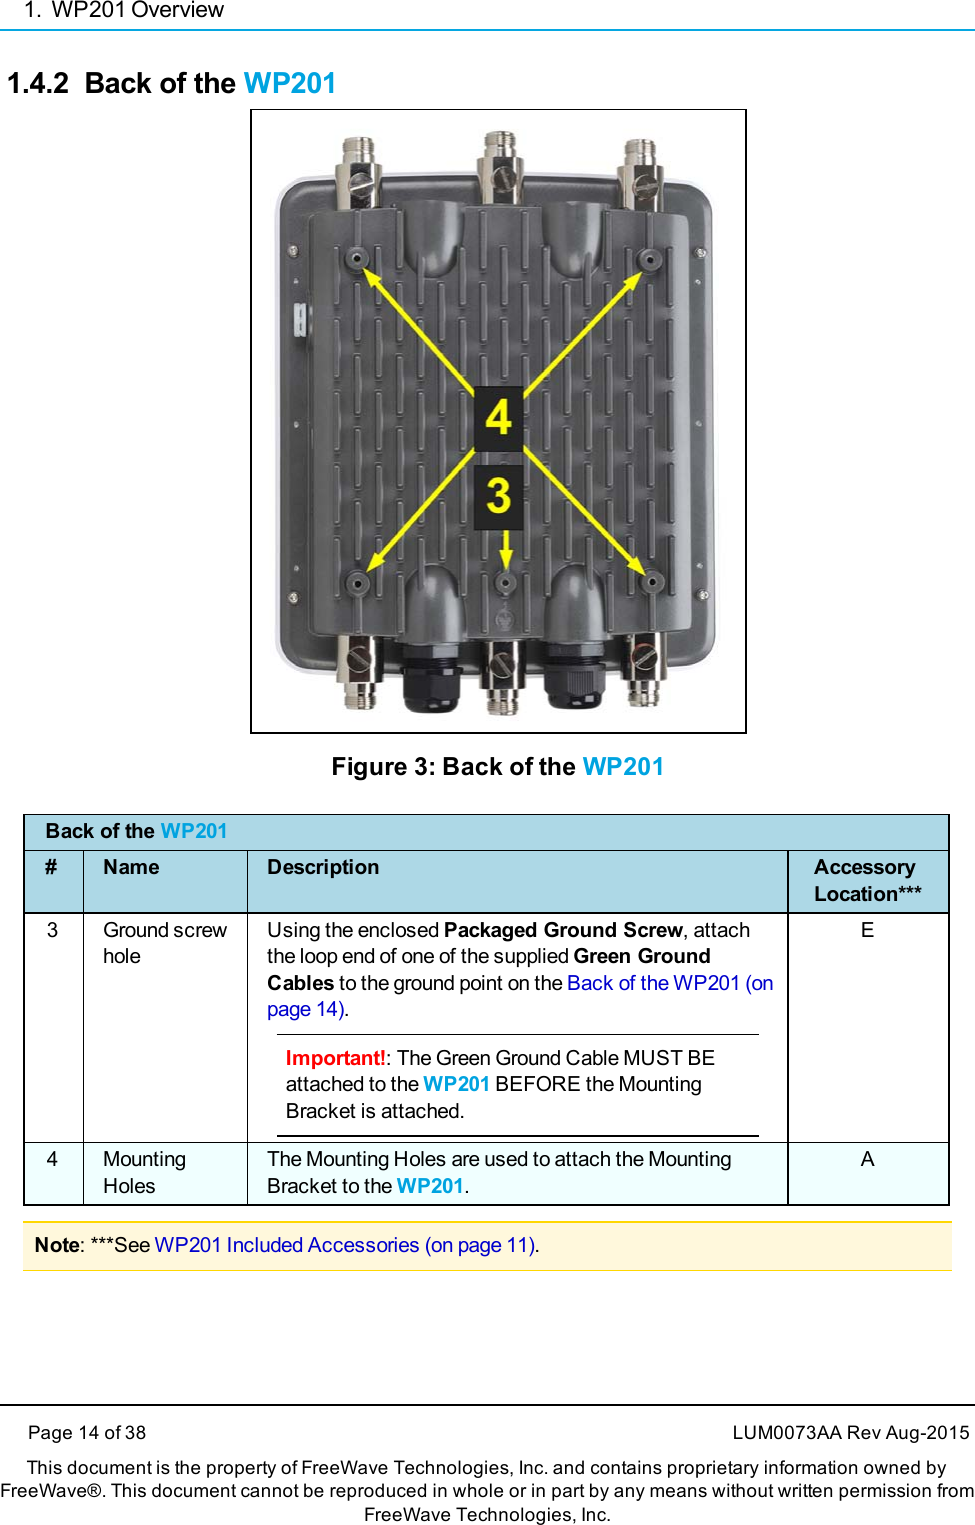 1. WP201 Overview1.4.2 Back of the WP201Figure 3: Back of the WP201Back of the WP201# Name Description AccessoryLocation***3 Ground screwholeUsing the enclosed Packaged Ground Screw, attachthe loop end of one of the supplied Green GroundCables to the ground point on the Back of the WP201 (onpage 14).Important!: The Green Ground Cable MUST BEattached to the WP201 BEFORE the MountingBracket is attached.E4 MountingHolesThe Mounting Holes are used to attach the MountingBracket to the WP201.ANote: ***See WP201 Included Accessories (on page 11).Page 14 of 38 LUM0073AA Rev Aug-2015This document is the property of FreeWave Technologies, Inc. and contains proprietary information owned byFreeWave®. This document cannot be reproduced in whole or in part by any means without written permission fromFreeWave Technologies, Inc.